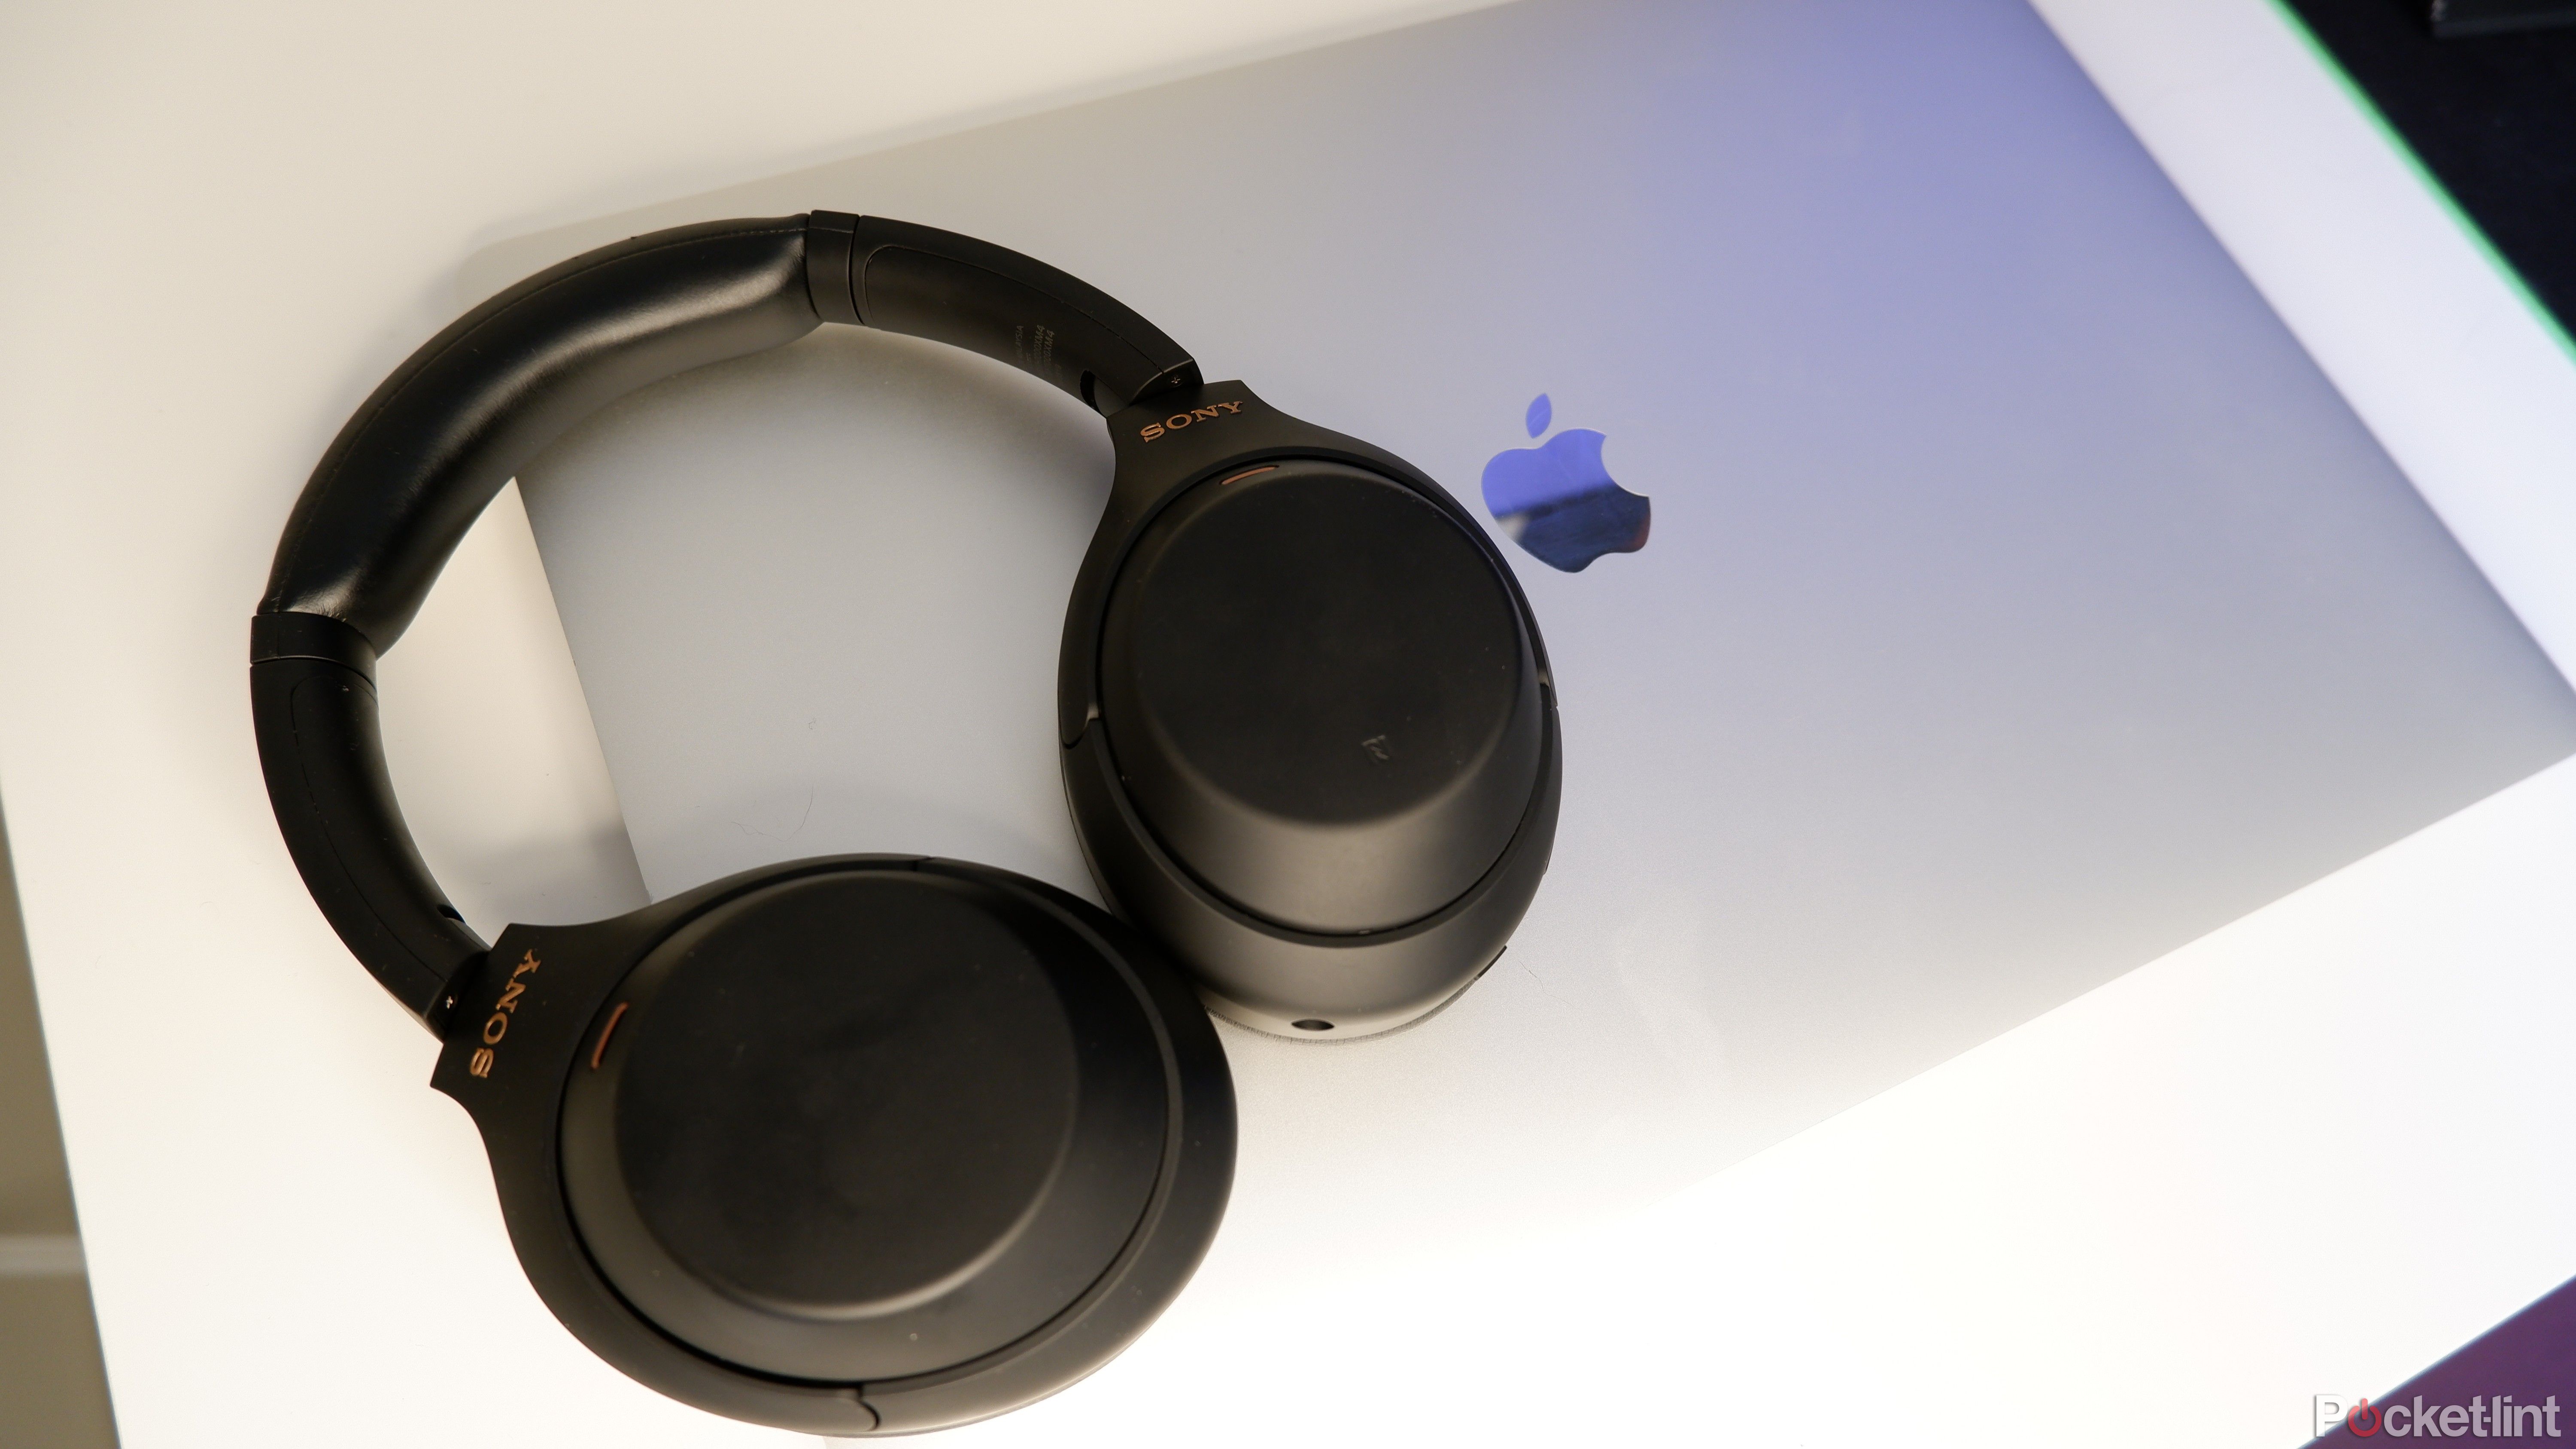 A pair of Sony WH-1000XM4 on a closed Macbook Pro.